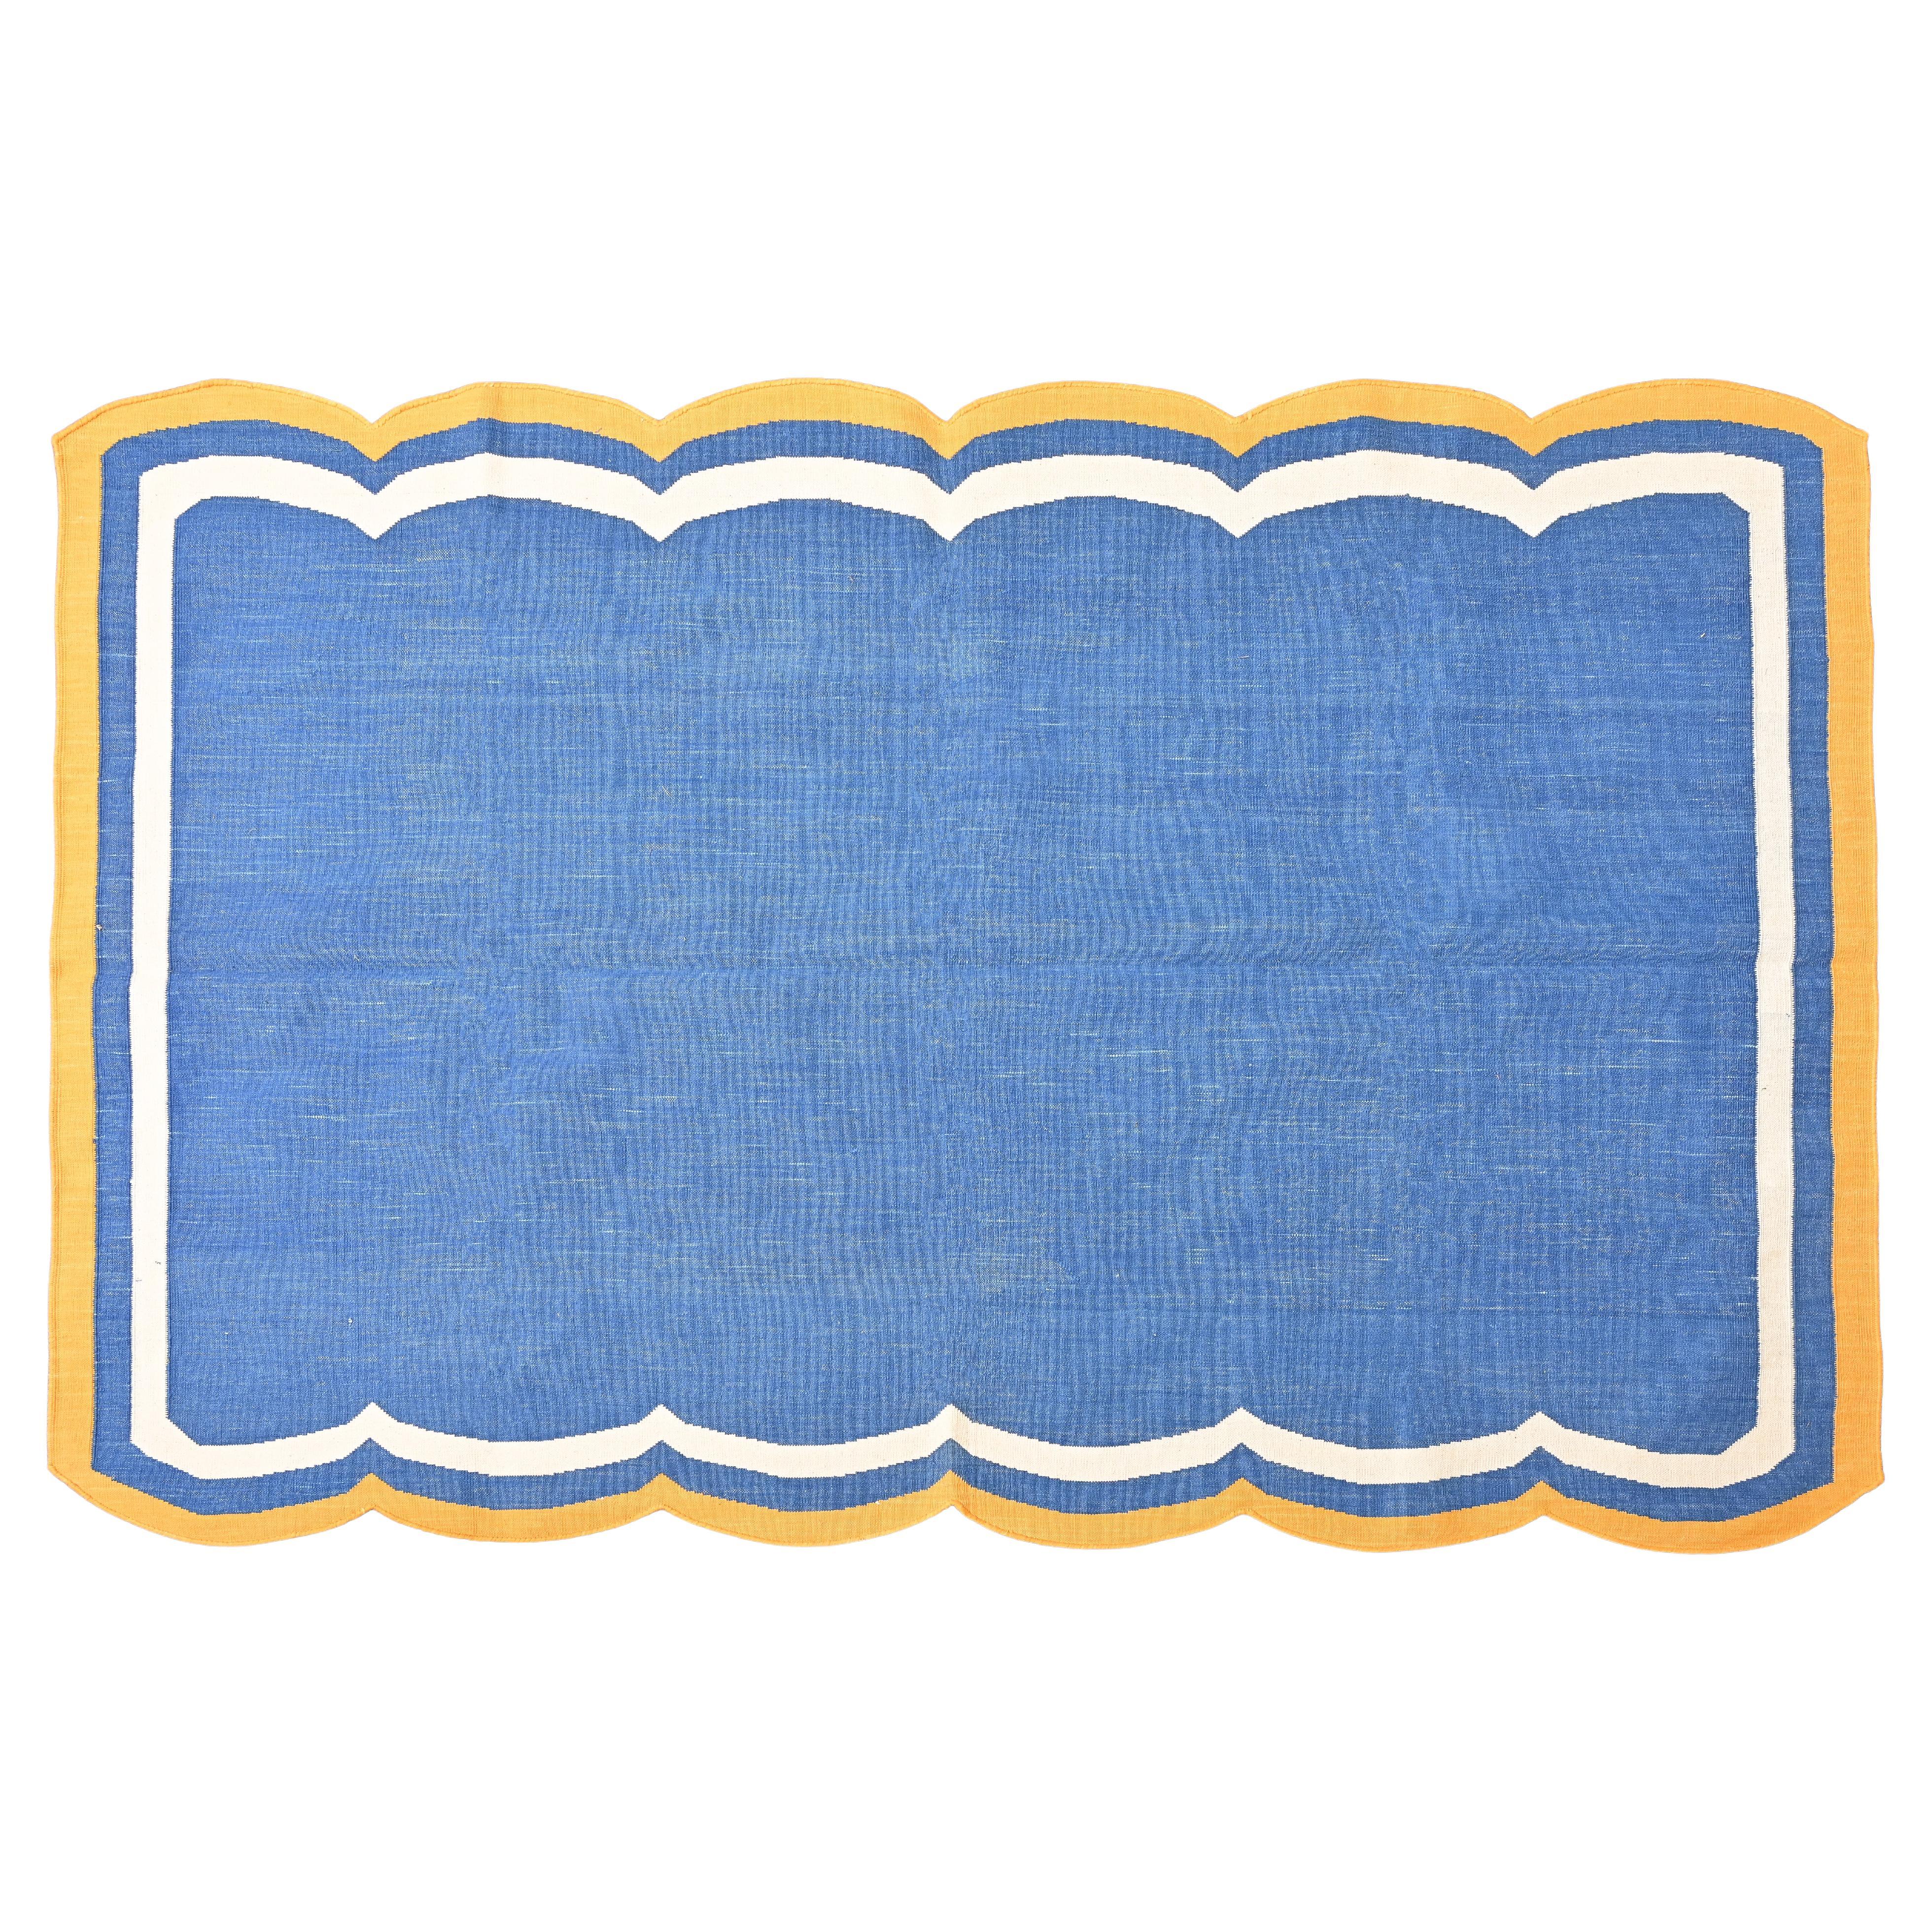 Handmade Cotton Area Flat Weave Rug, 4x6 Blue And Yellow Scallop Indian Dhurrie